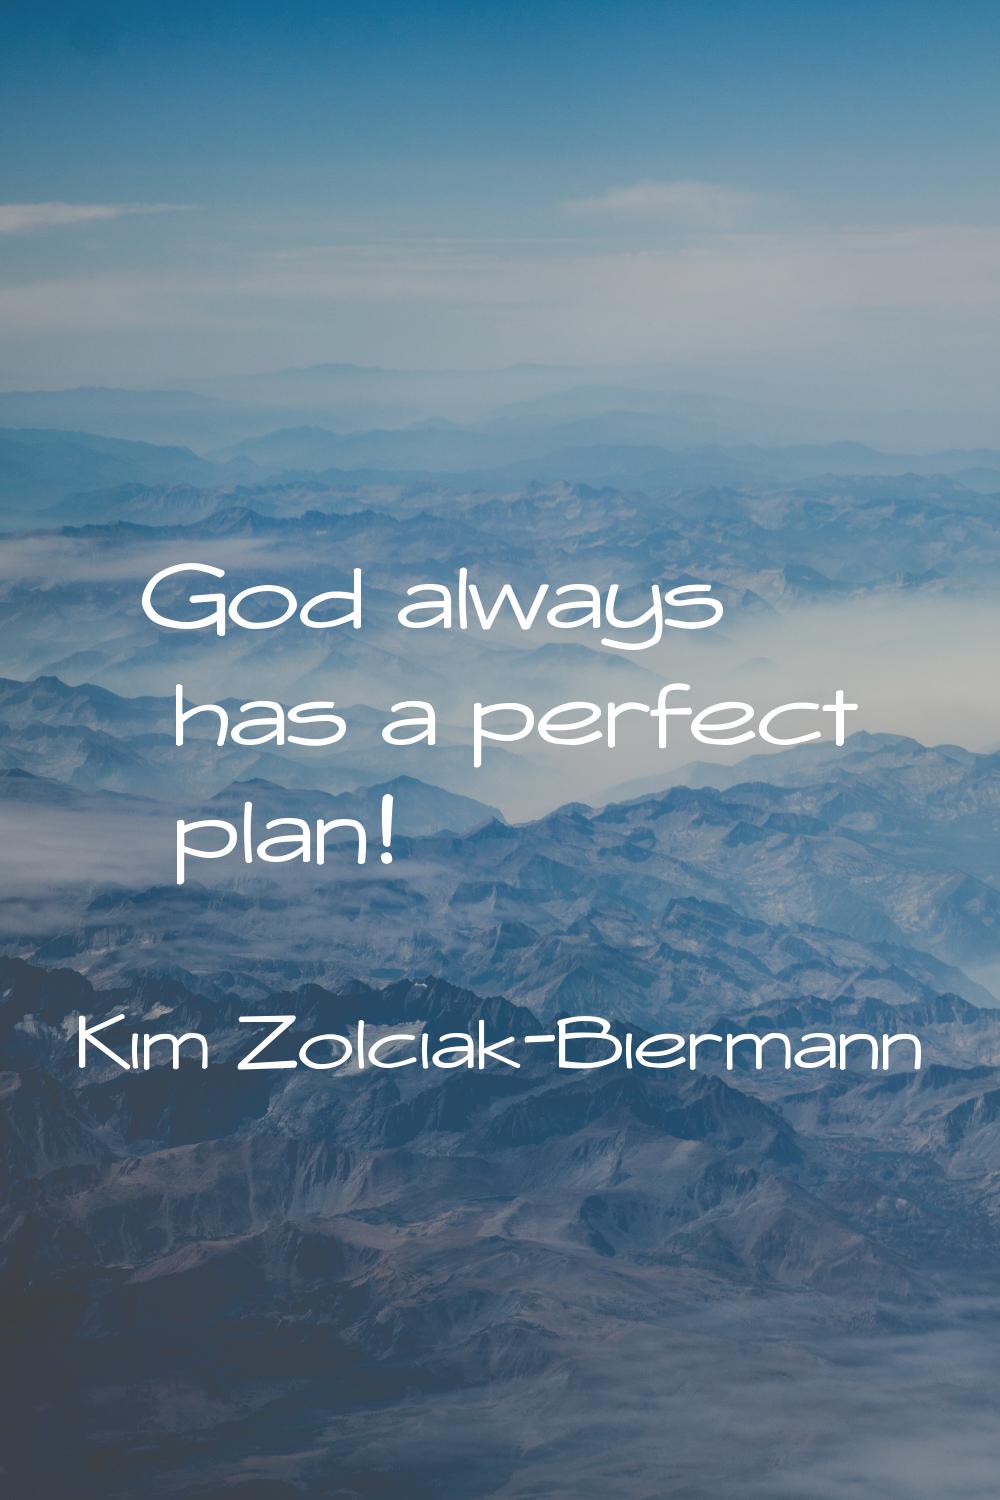 God always has a perfect plan!